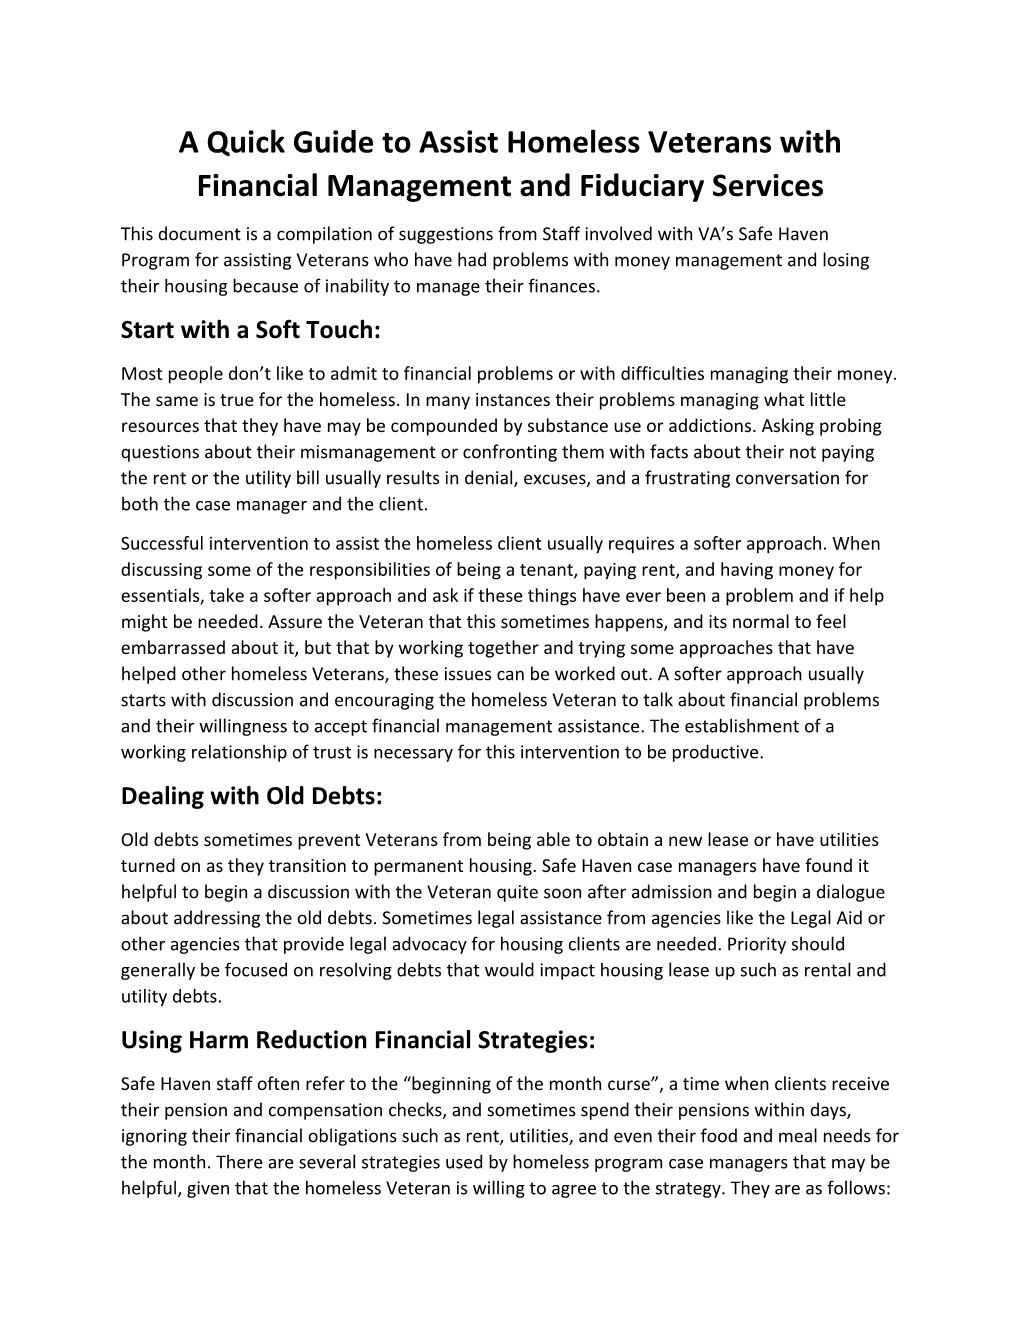 A Quick Guide Toassist Homeless Veterans with Financial Management and Fiduciary Services